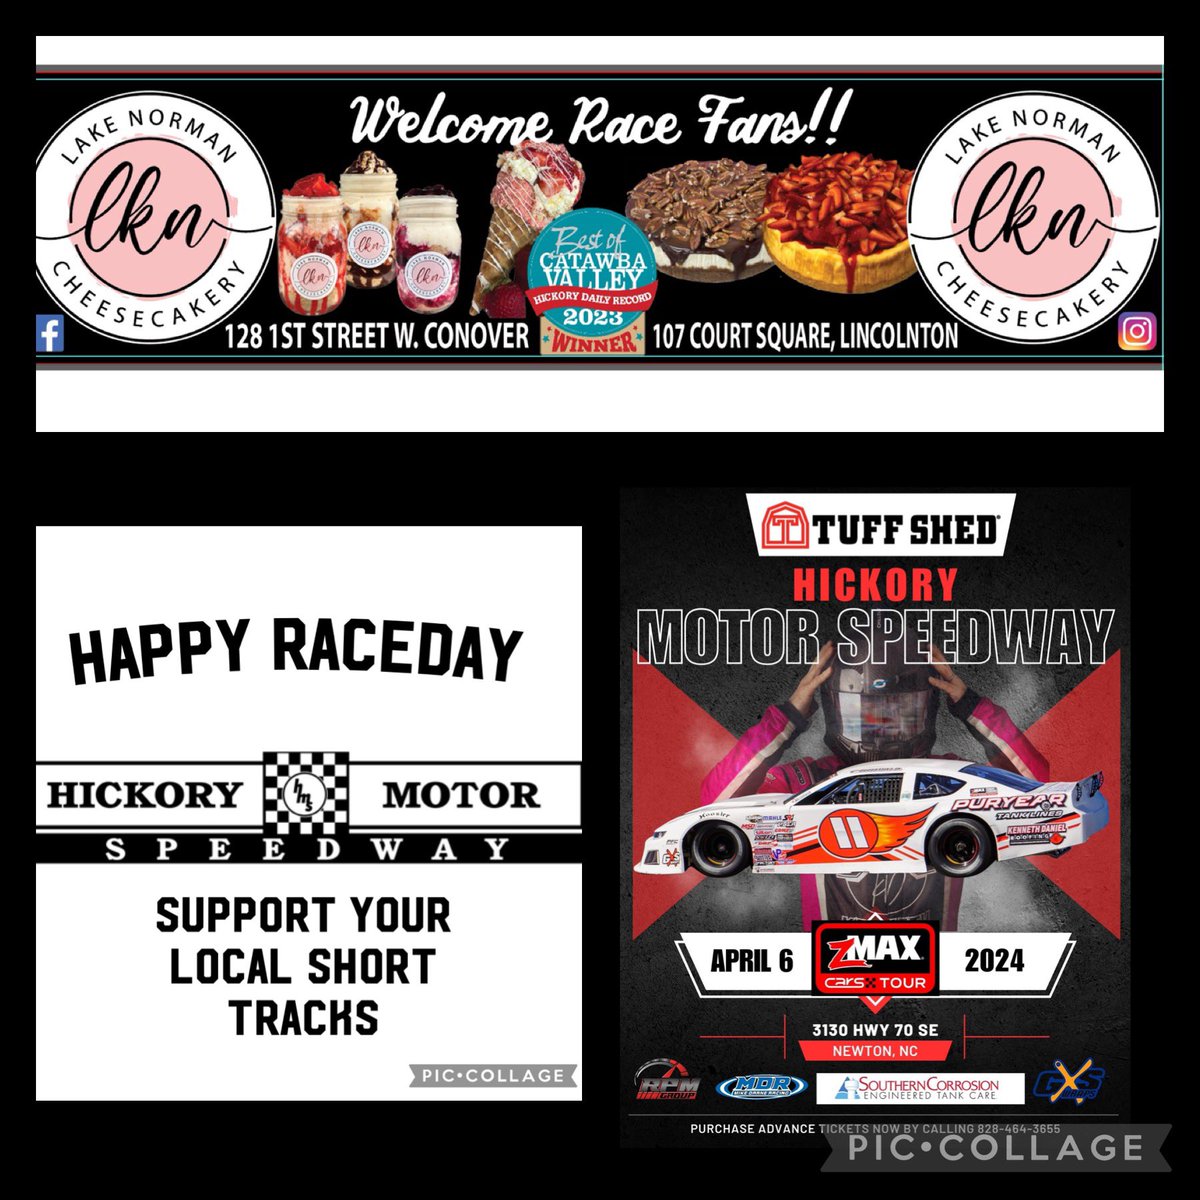 HAPPY RACE DAY!!! Support local short track racing. Yall come see us in turn 4. @hickoryspeedway @CARSTour @FloRacing @NASCAR @GardnerStPhoto @ShortTrackRep @shorttracklife_ @deezlugnutz #hickory #carstour #grassroots #shorttrack #lakenorman #cheesecake #tuffshed